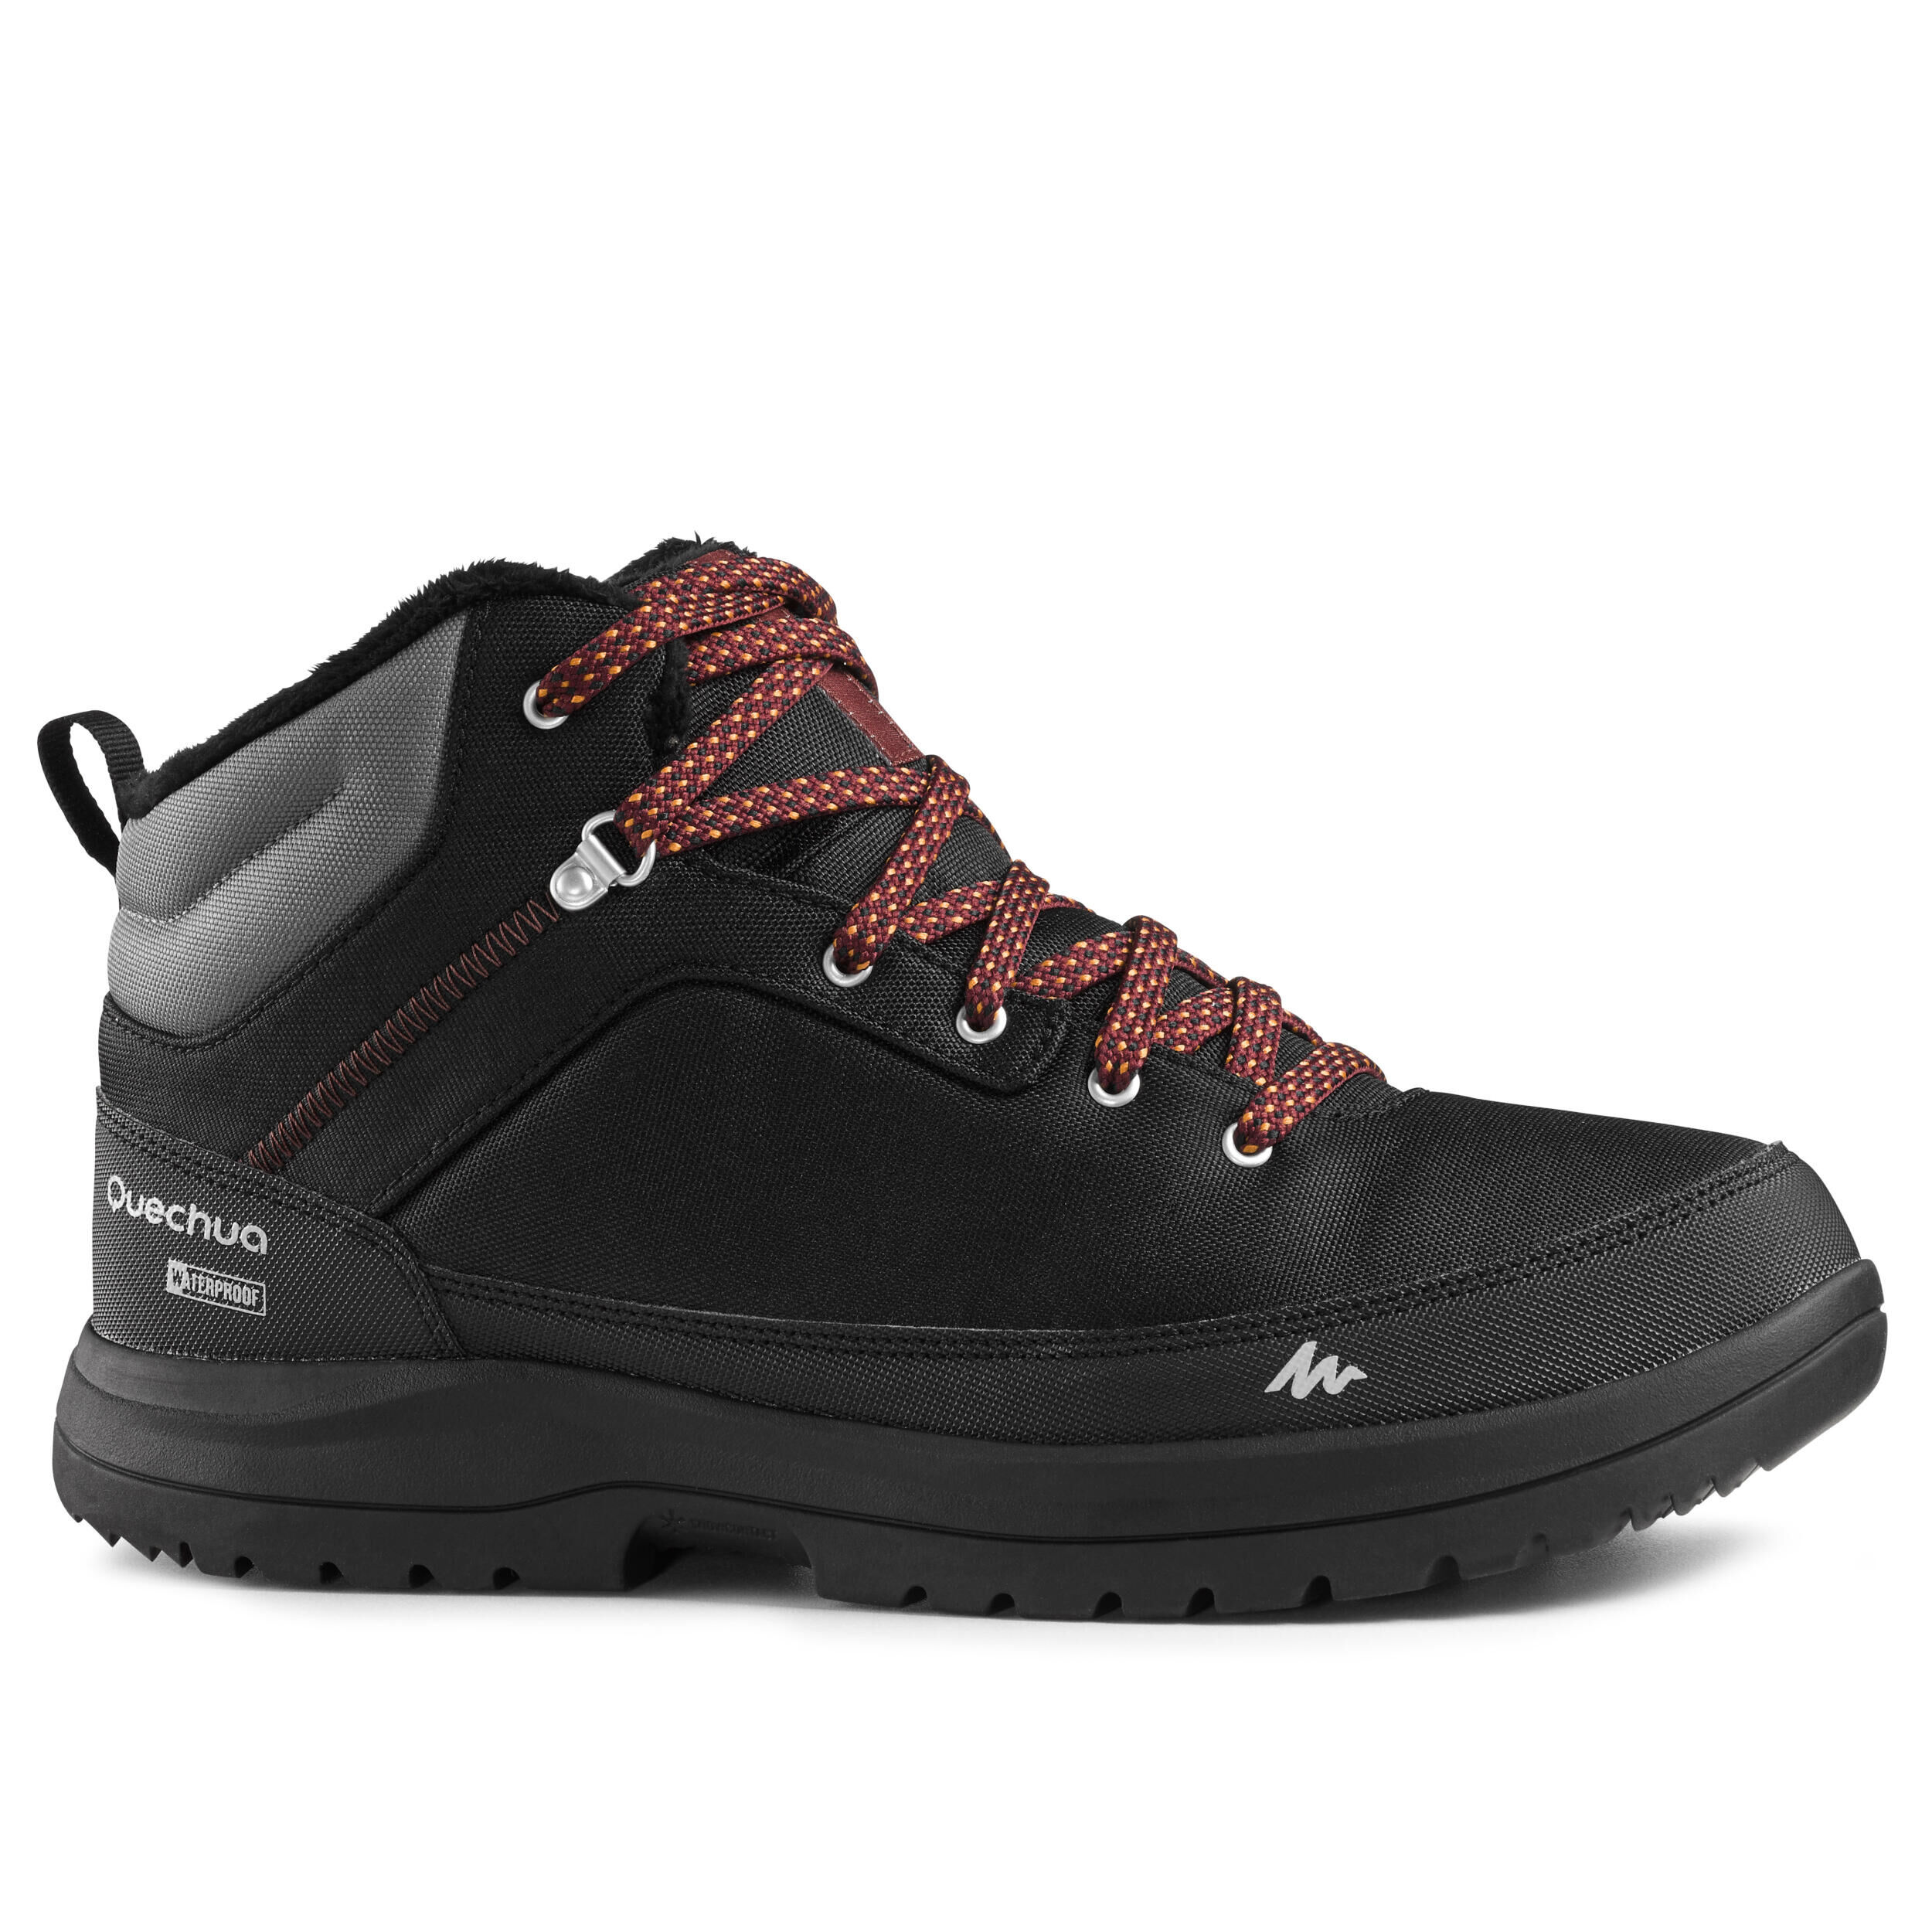 QUECHUA Men’s warm and waterproof hiking boots - SH100 Mid-height